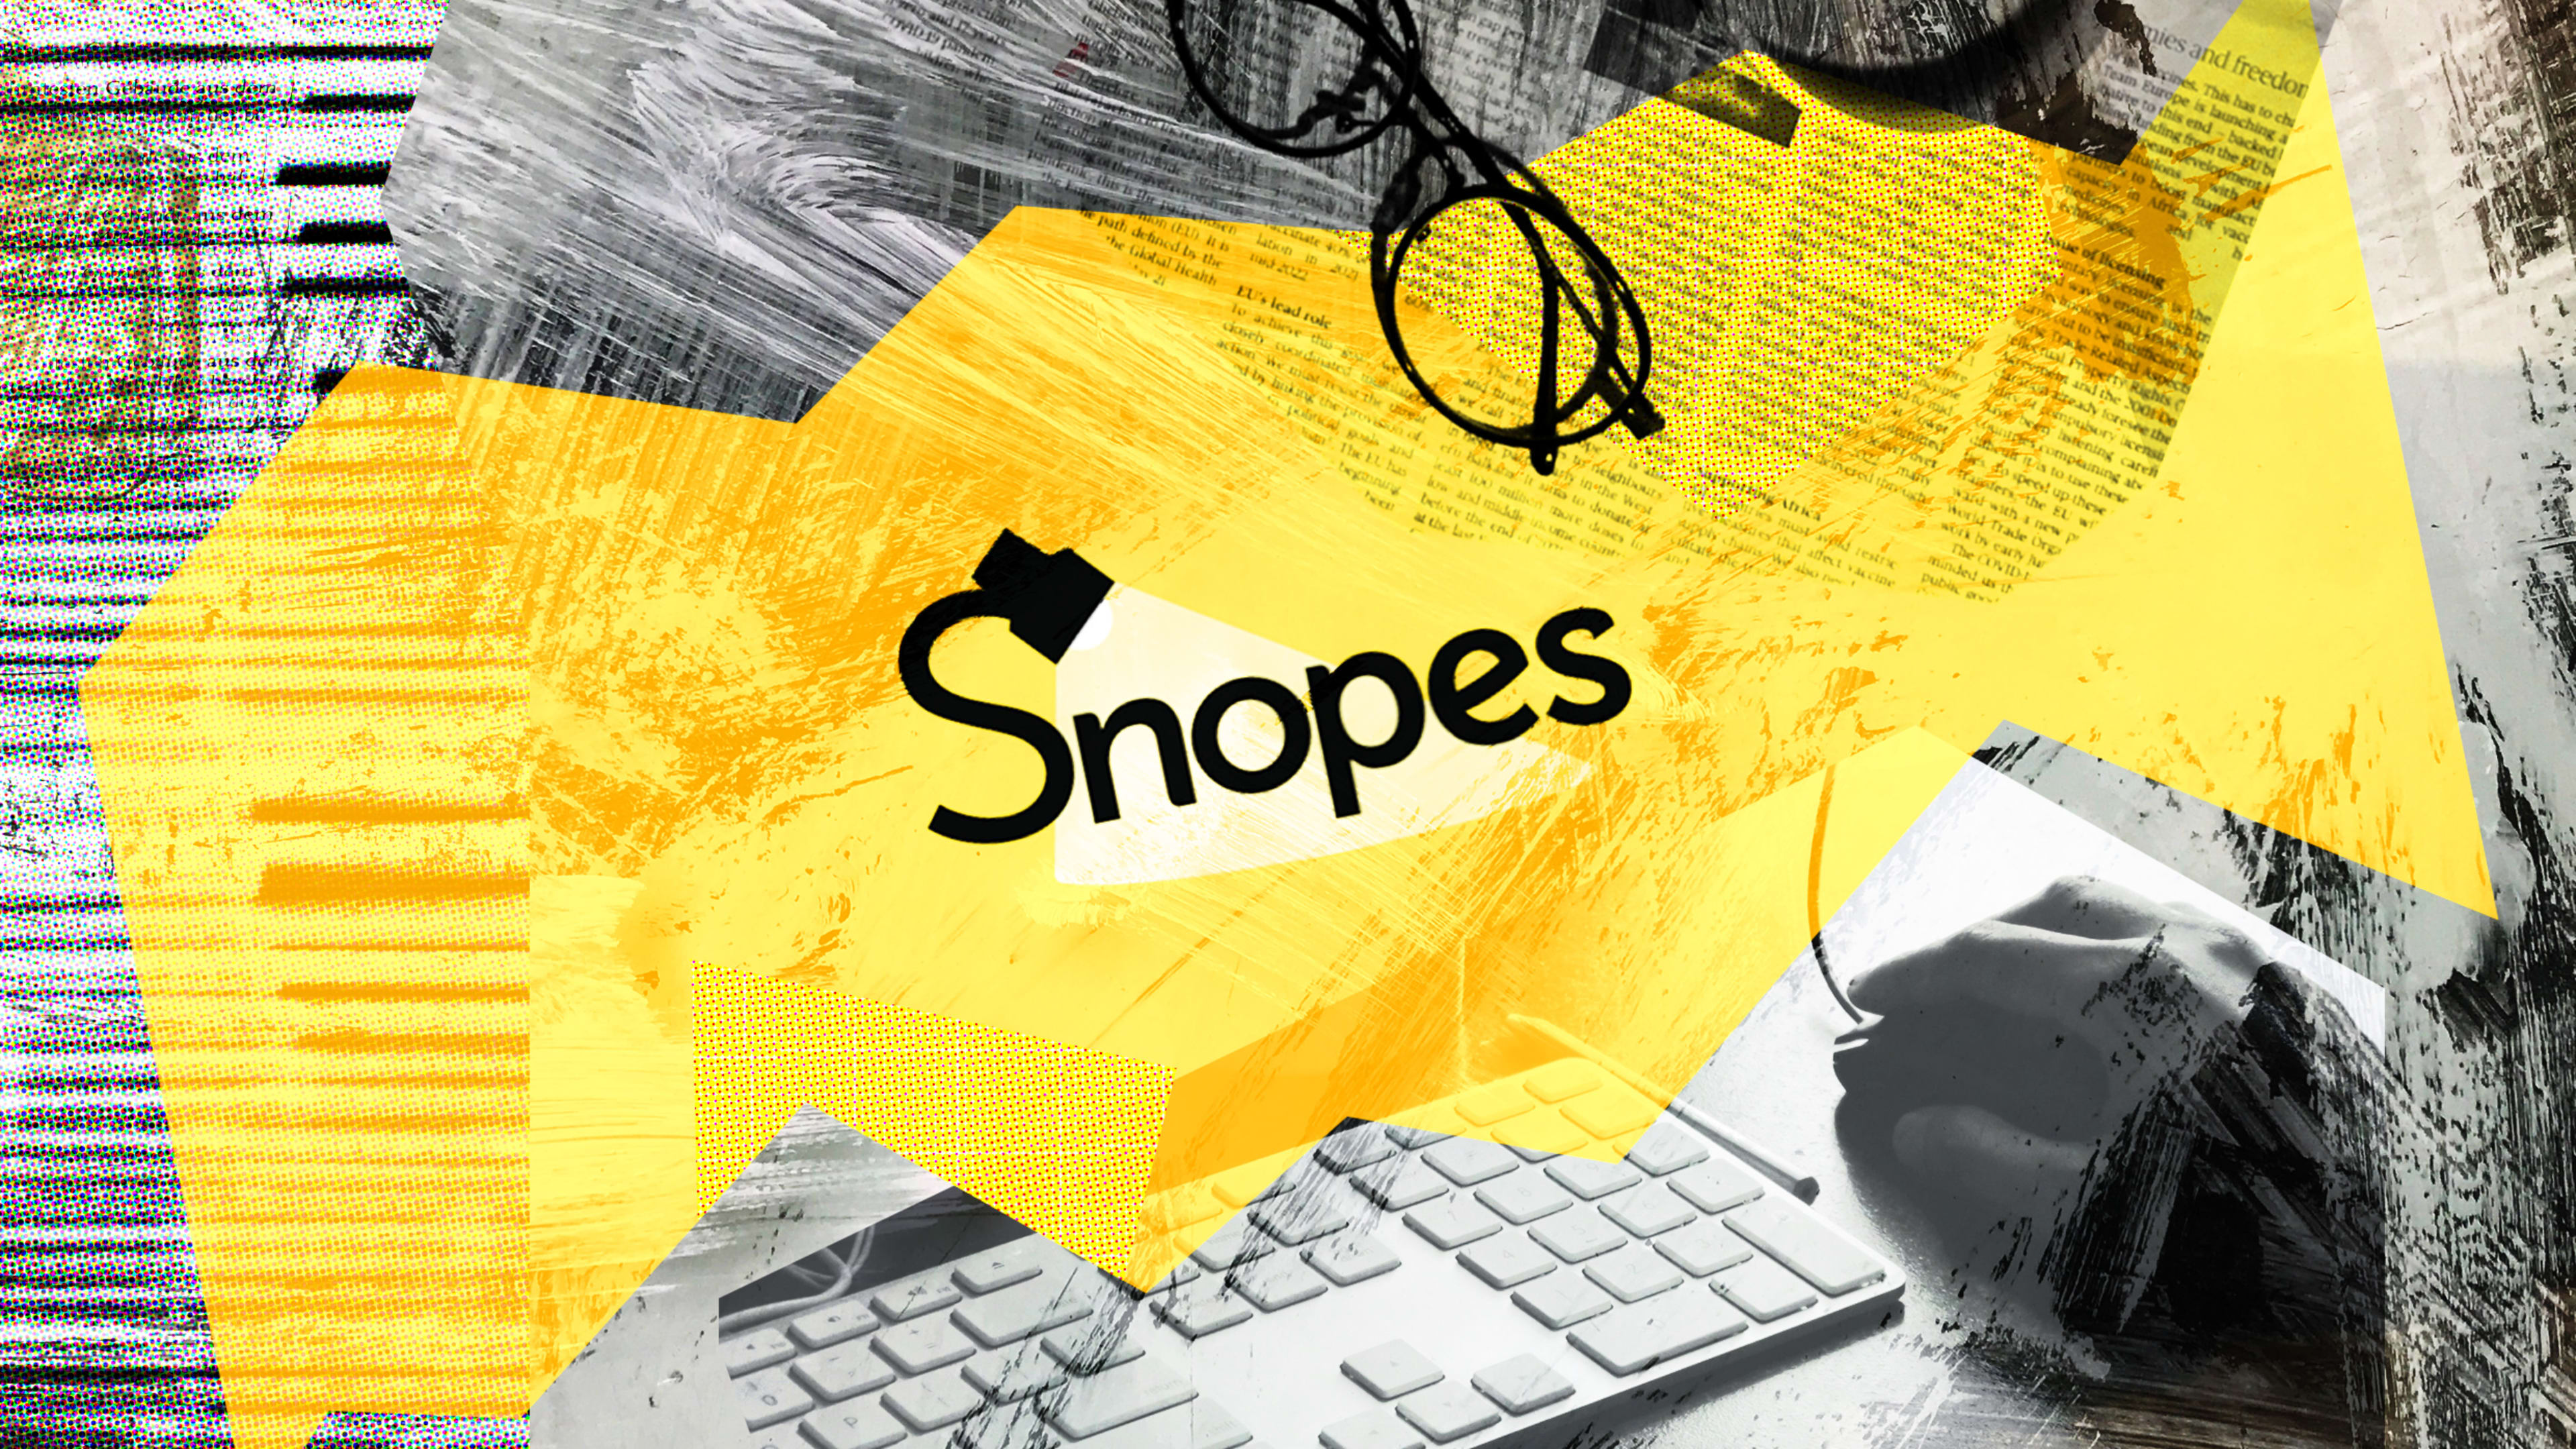 Inside Snopes: the rise, fall, and rebirth of an internet icon